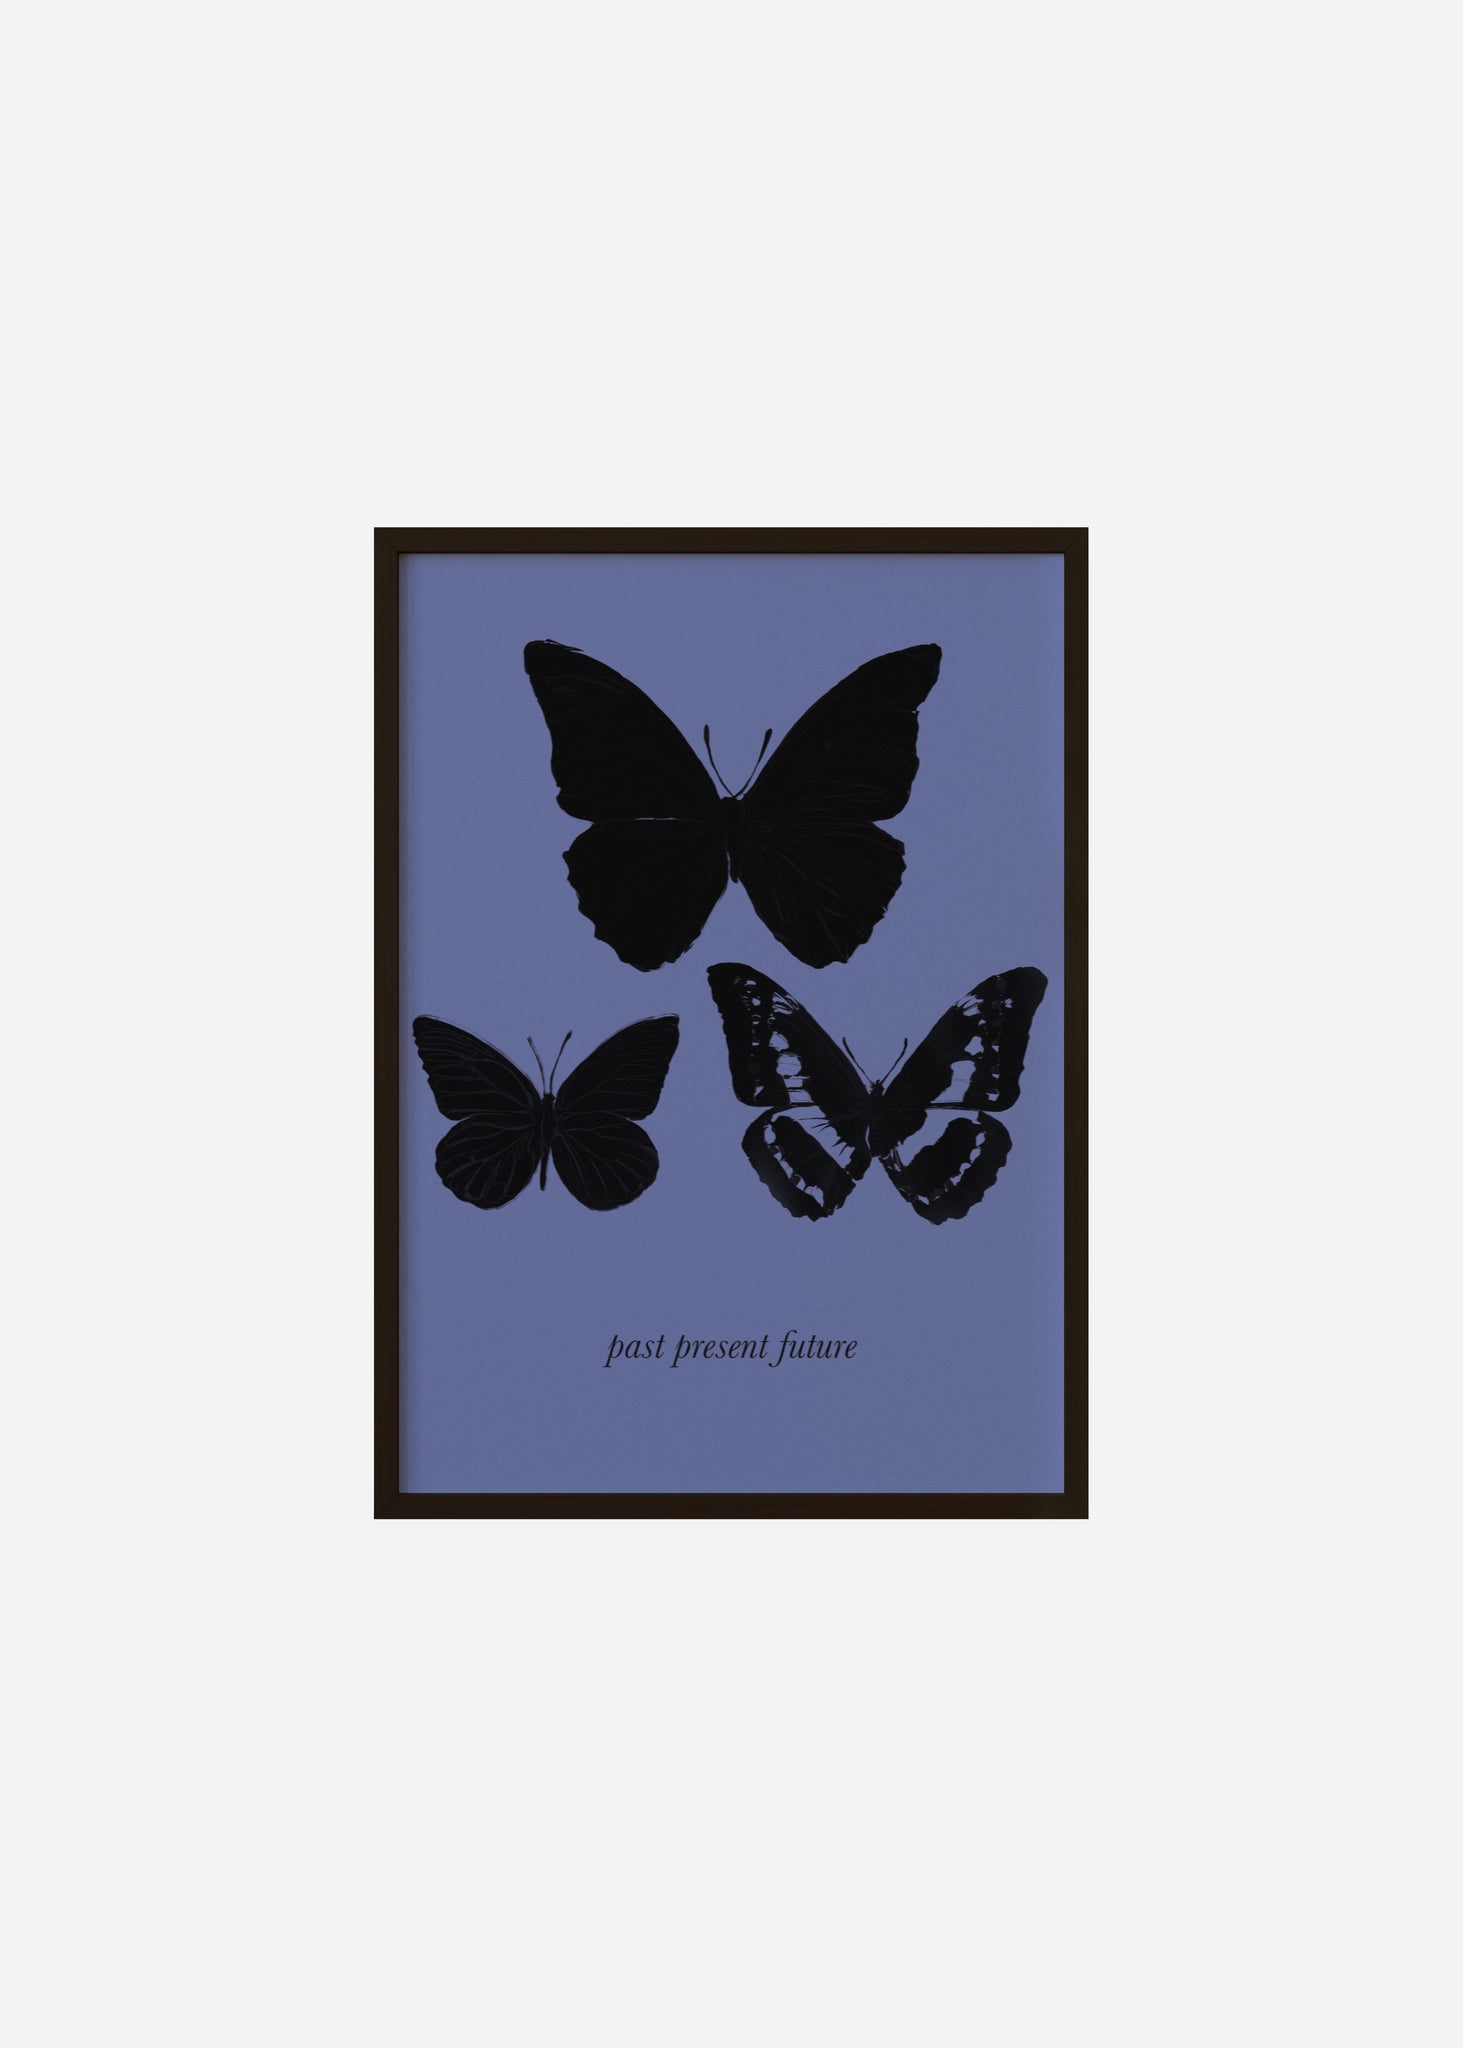 The Butterfly Effect / Past Present Future Framed Print